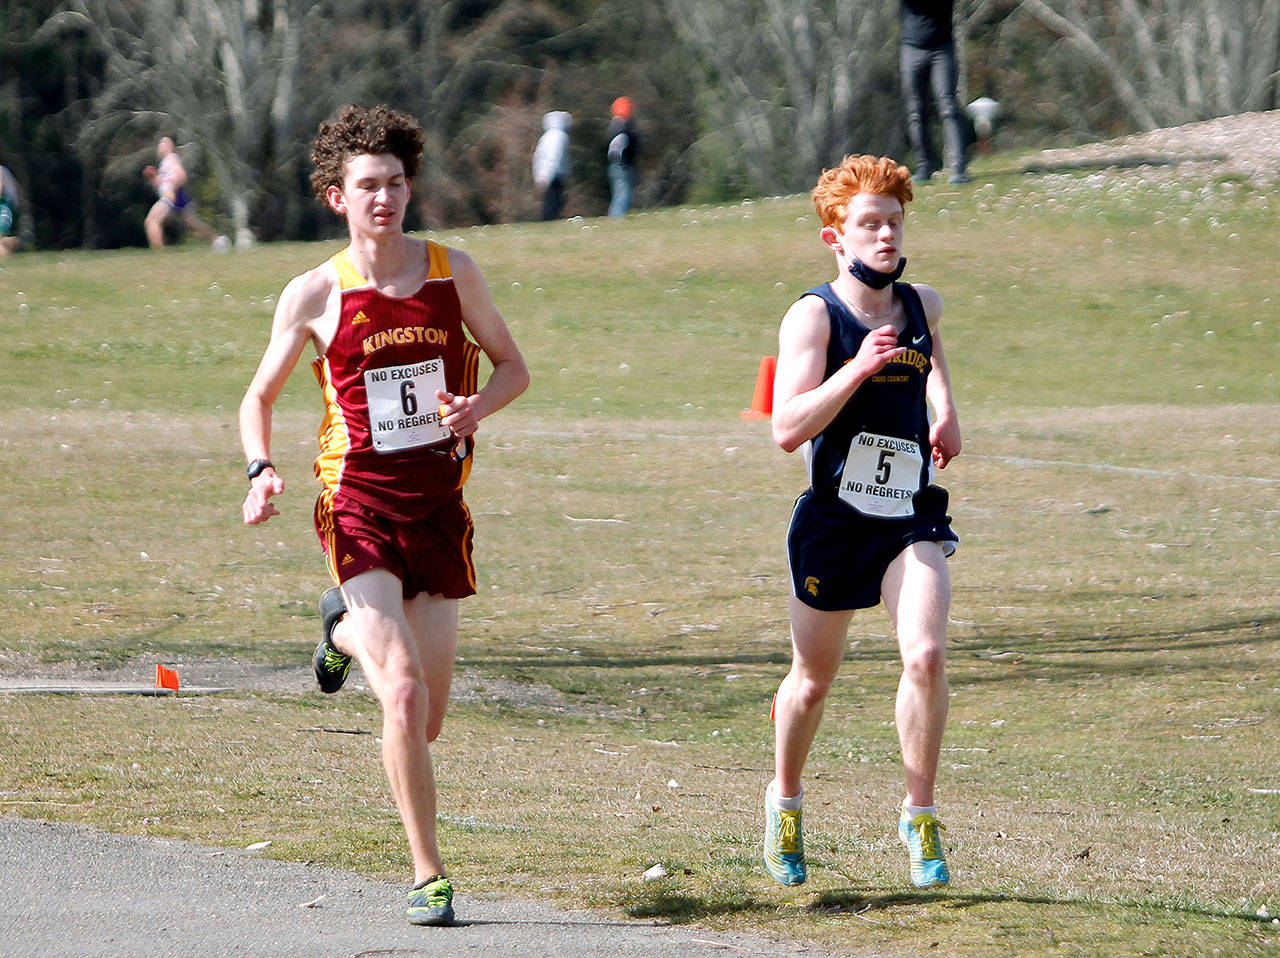 Kingston’s Curtis Upton (left) and Bainbridge’s Alex Miller (right) run neck-and-neck early in the championship race. (Mark Krulish/Kitsap News Group)